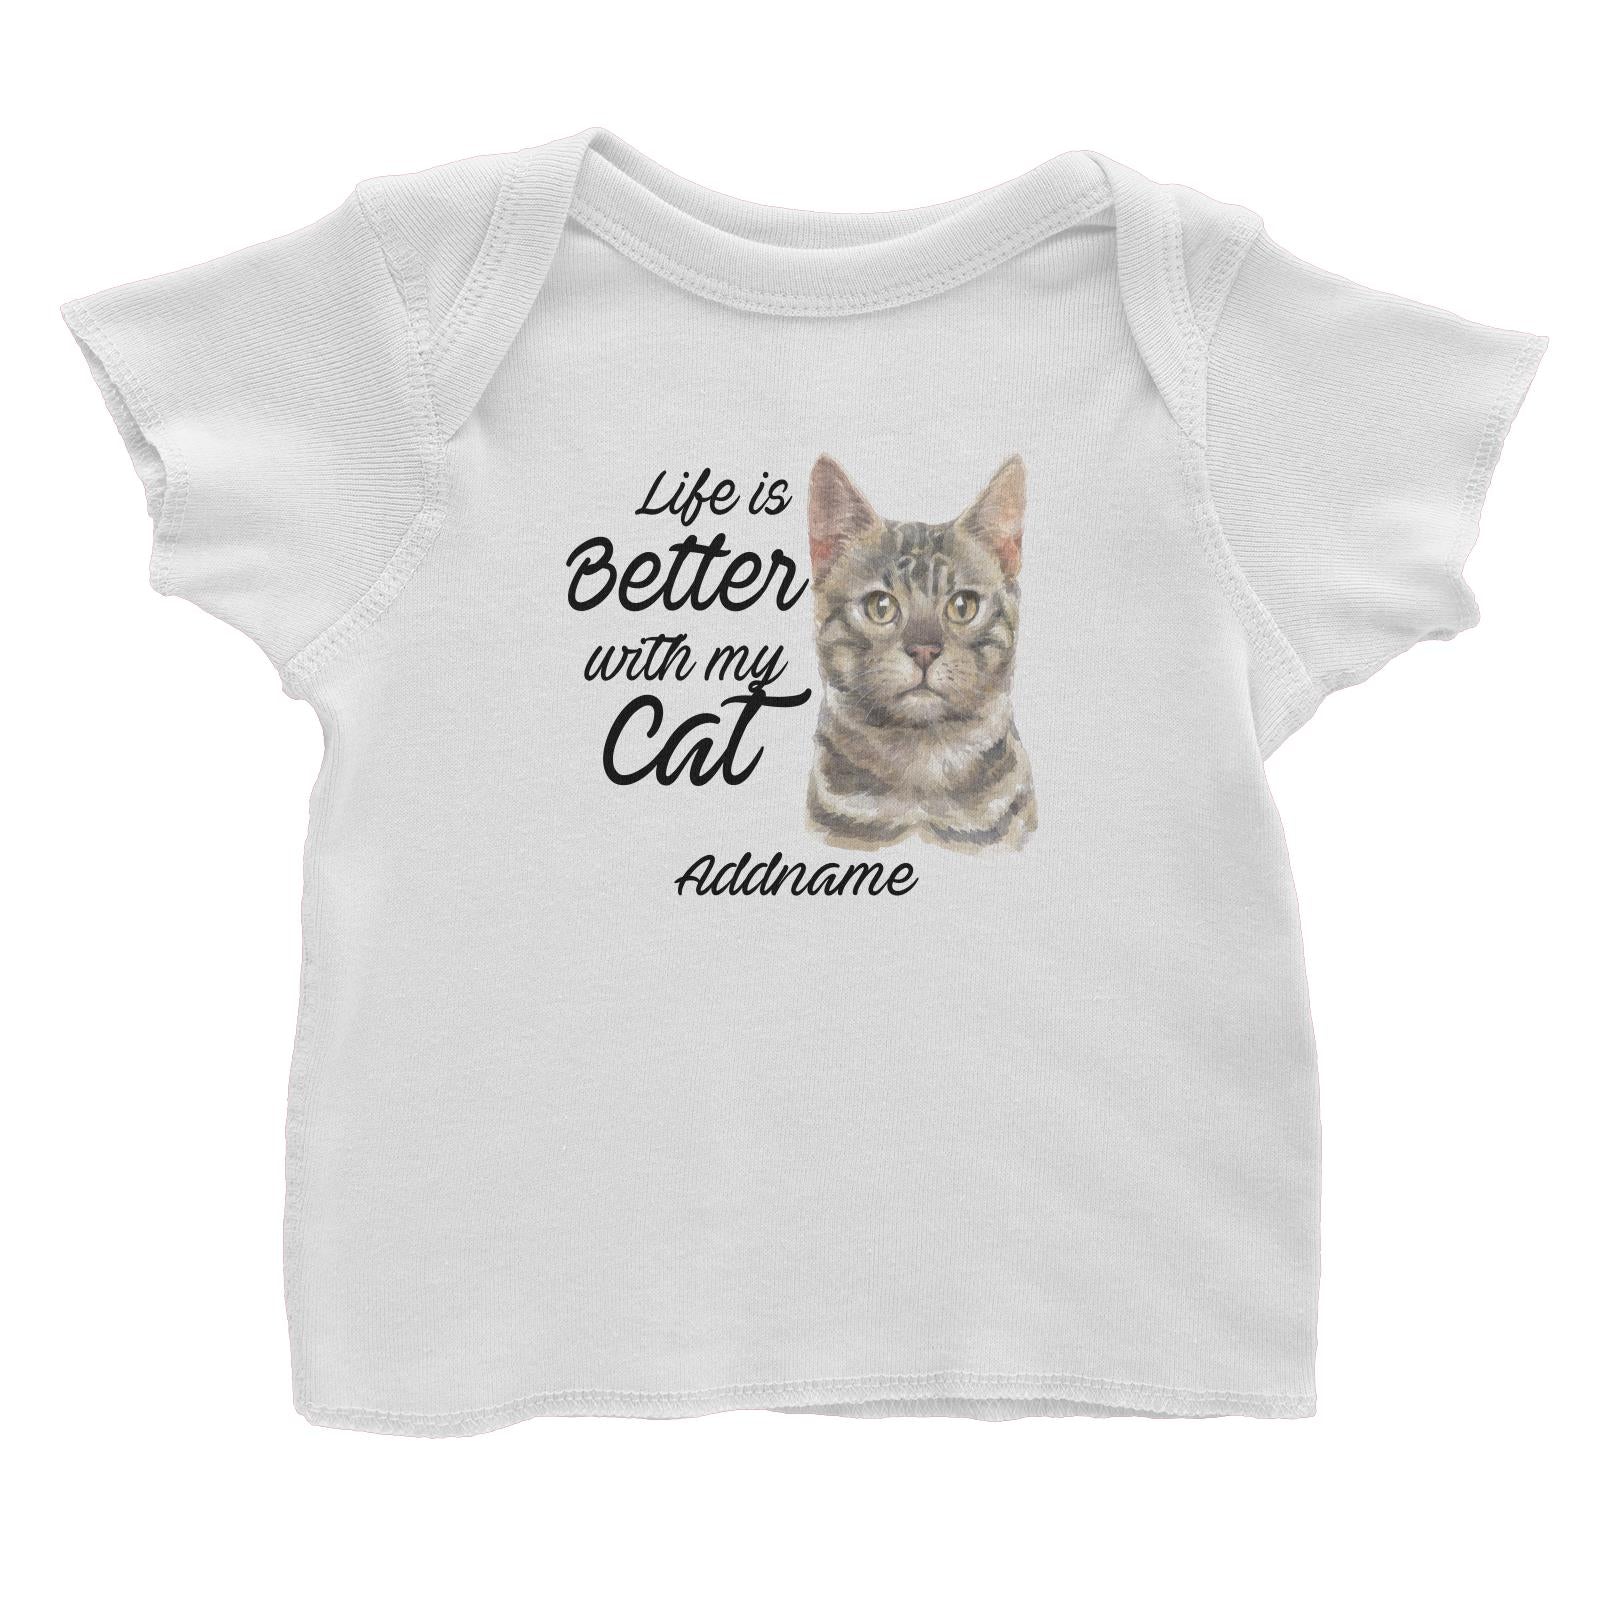 Watercolor Life is Better With My Cat Bengal Grey Addname Baby T-Shirt